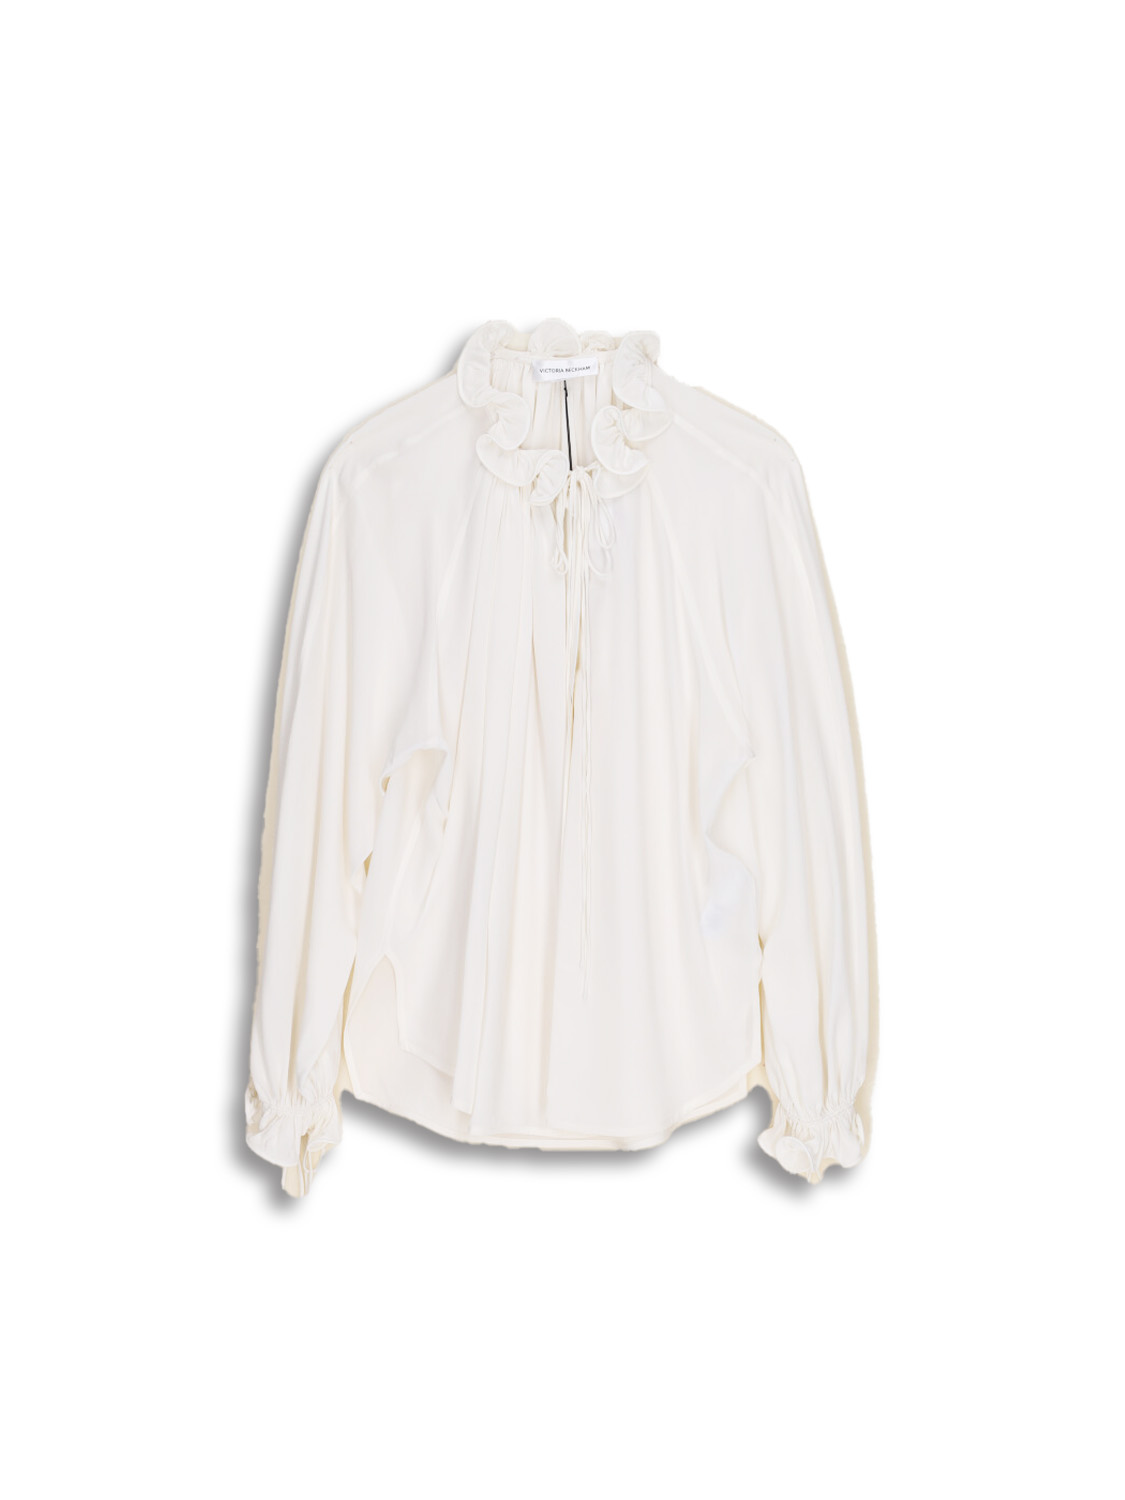 Victoria Beckham Ruched Detail Blouse - Long Sleeve Blouse with Ruched Details made of Silk white 38